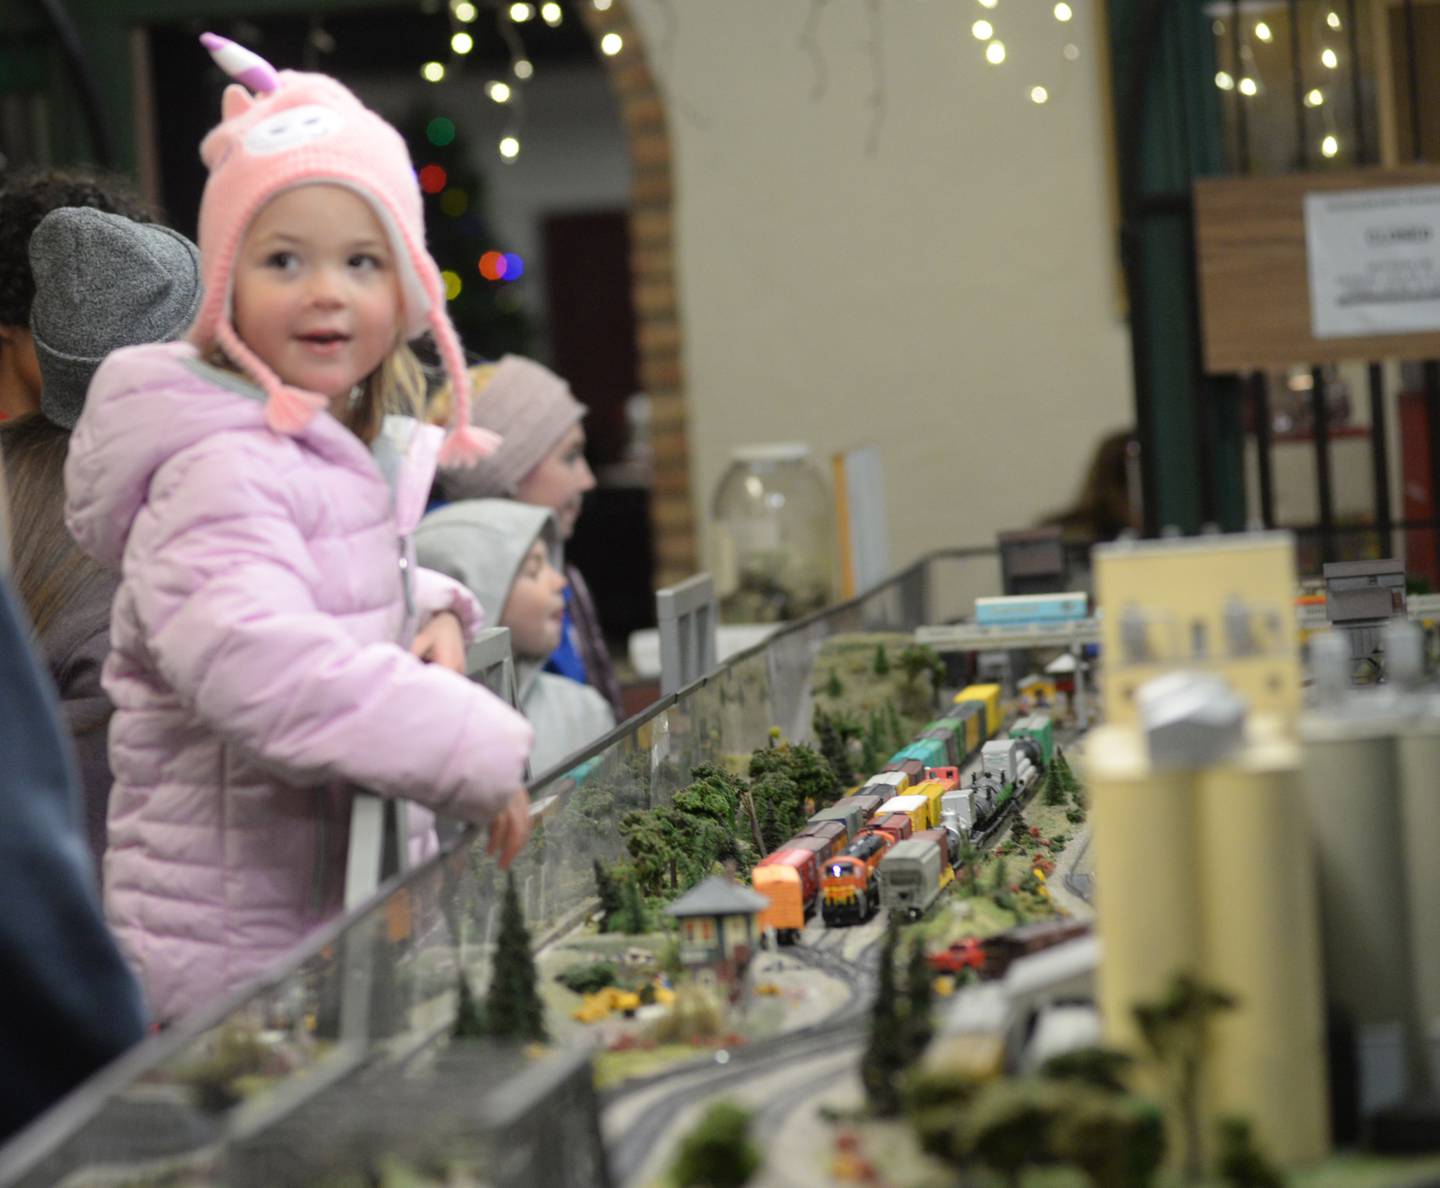 Mia Flaharty, 4,  of Oregon, watches a model train with her dad at the Blackhawk Model Railroad Club at Conover Square during Oregon's Candlelight Walk on Saturday, Nov. 25. 2023. The evening event also included Christmas music, shopping specials, and visits with Santa.